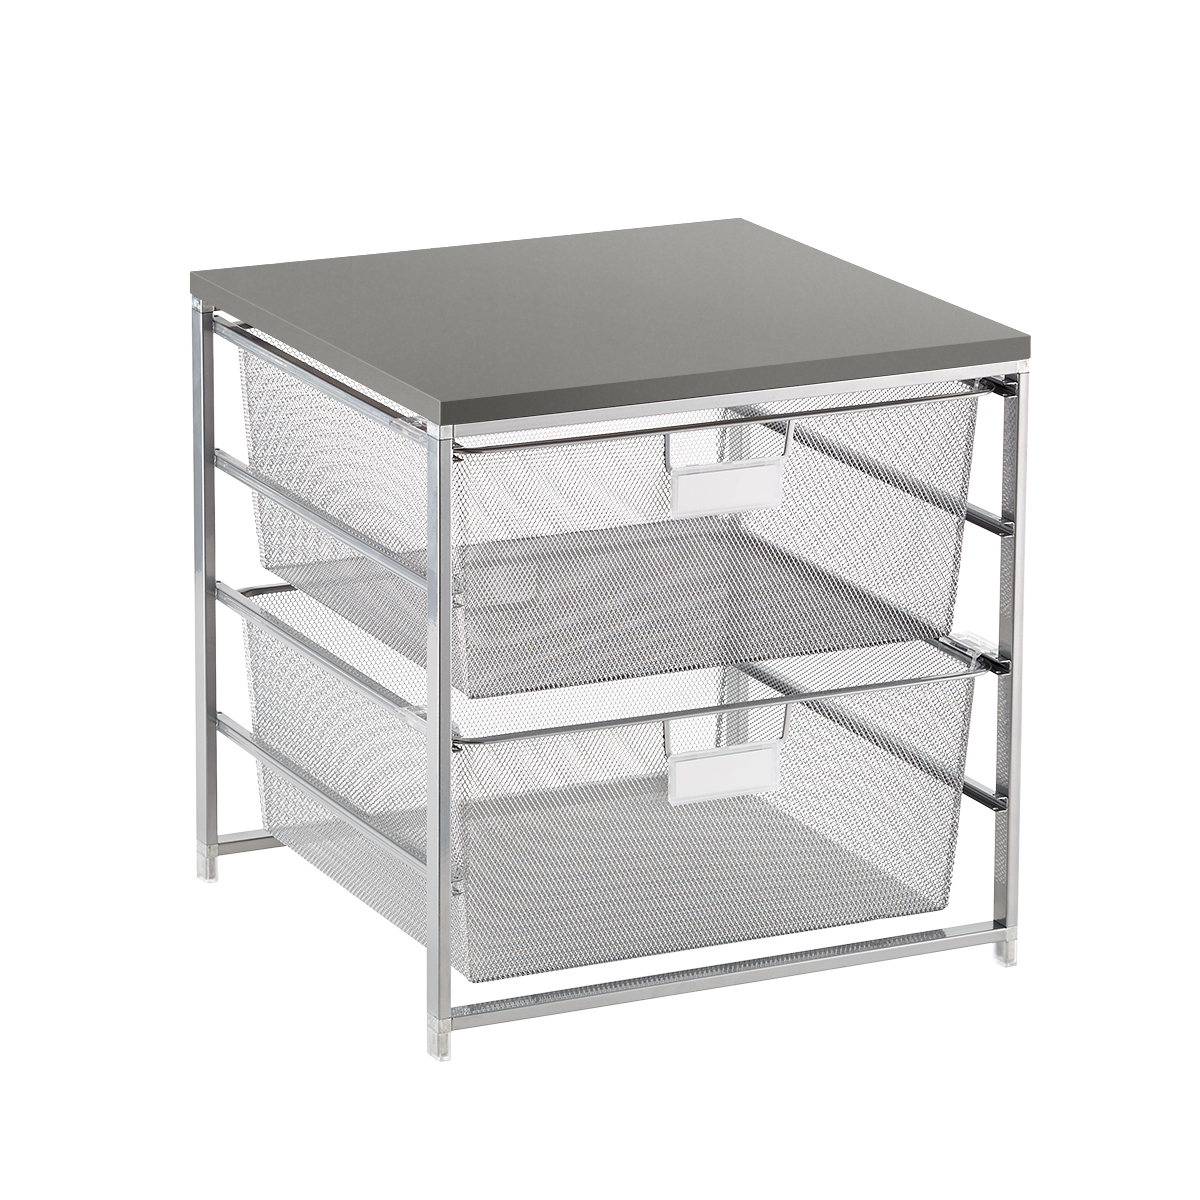 https://www.containerstore.com/catalogimages/406175/10084239-Elfa-cabinet-sized-2-drawer.jpg